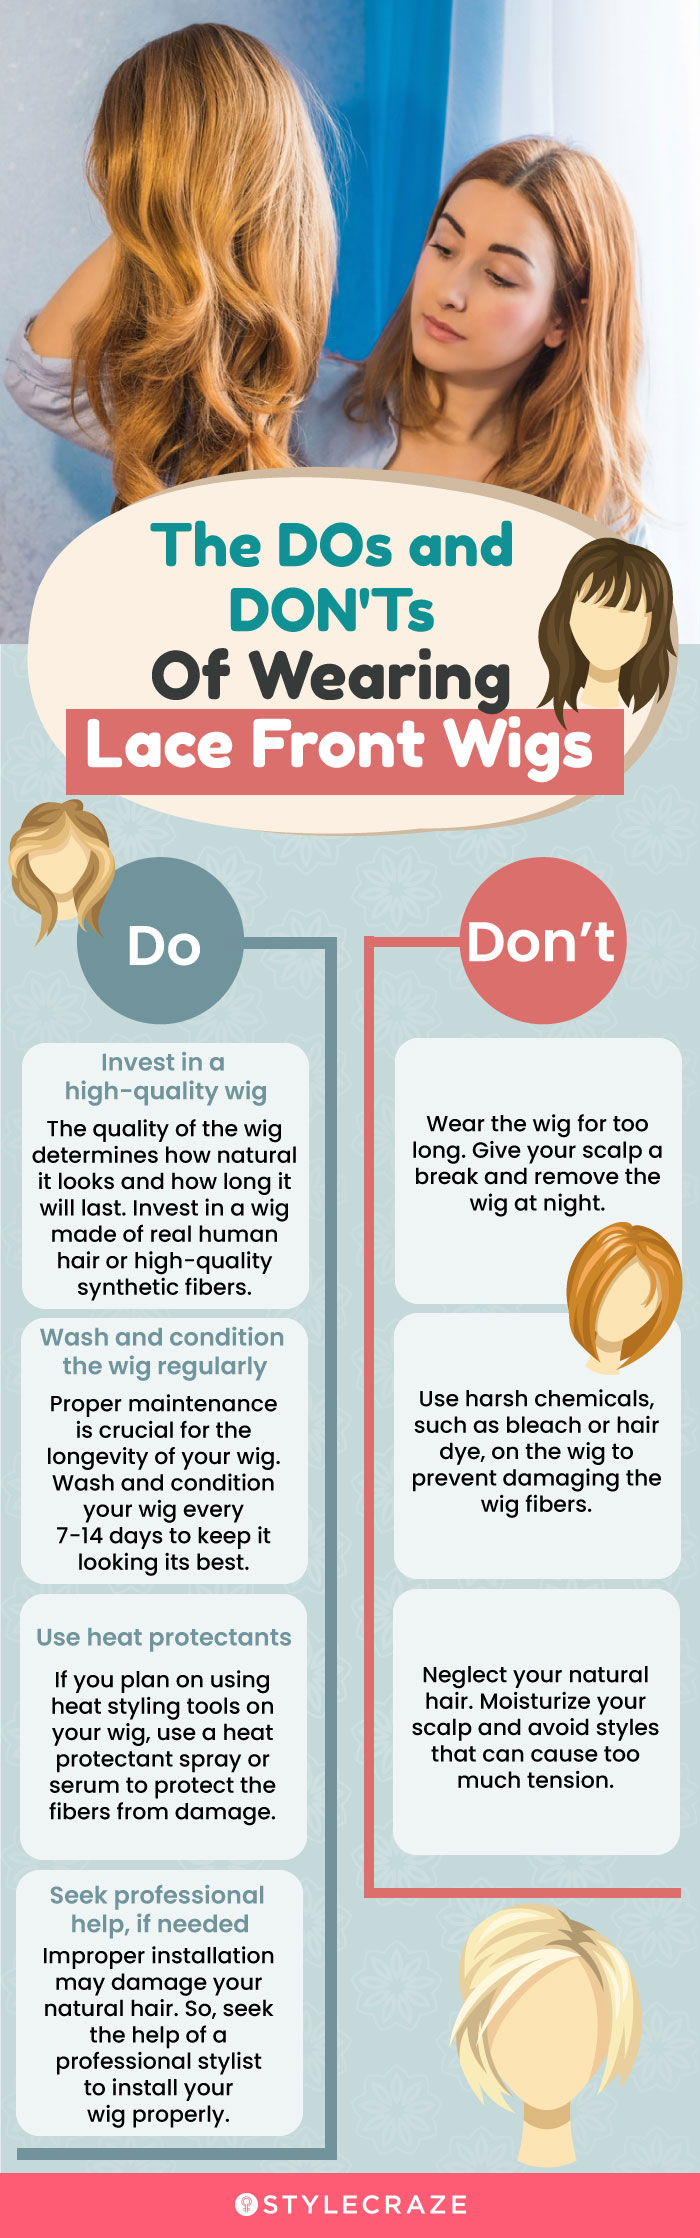 Do's and Don'ts of Wearing Lace Front Wigs (infographic)